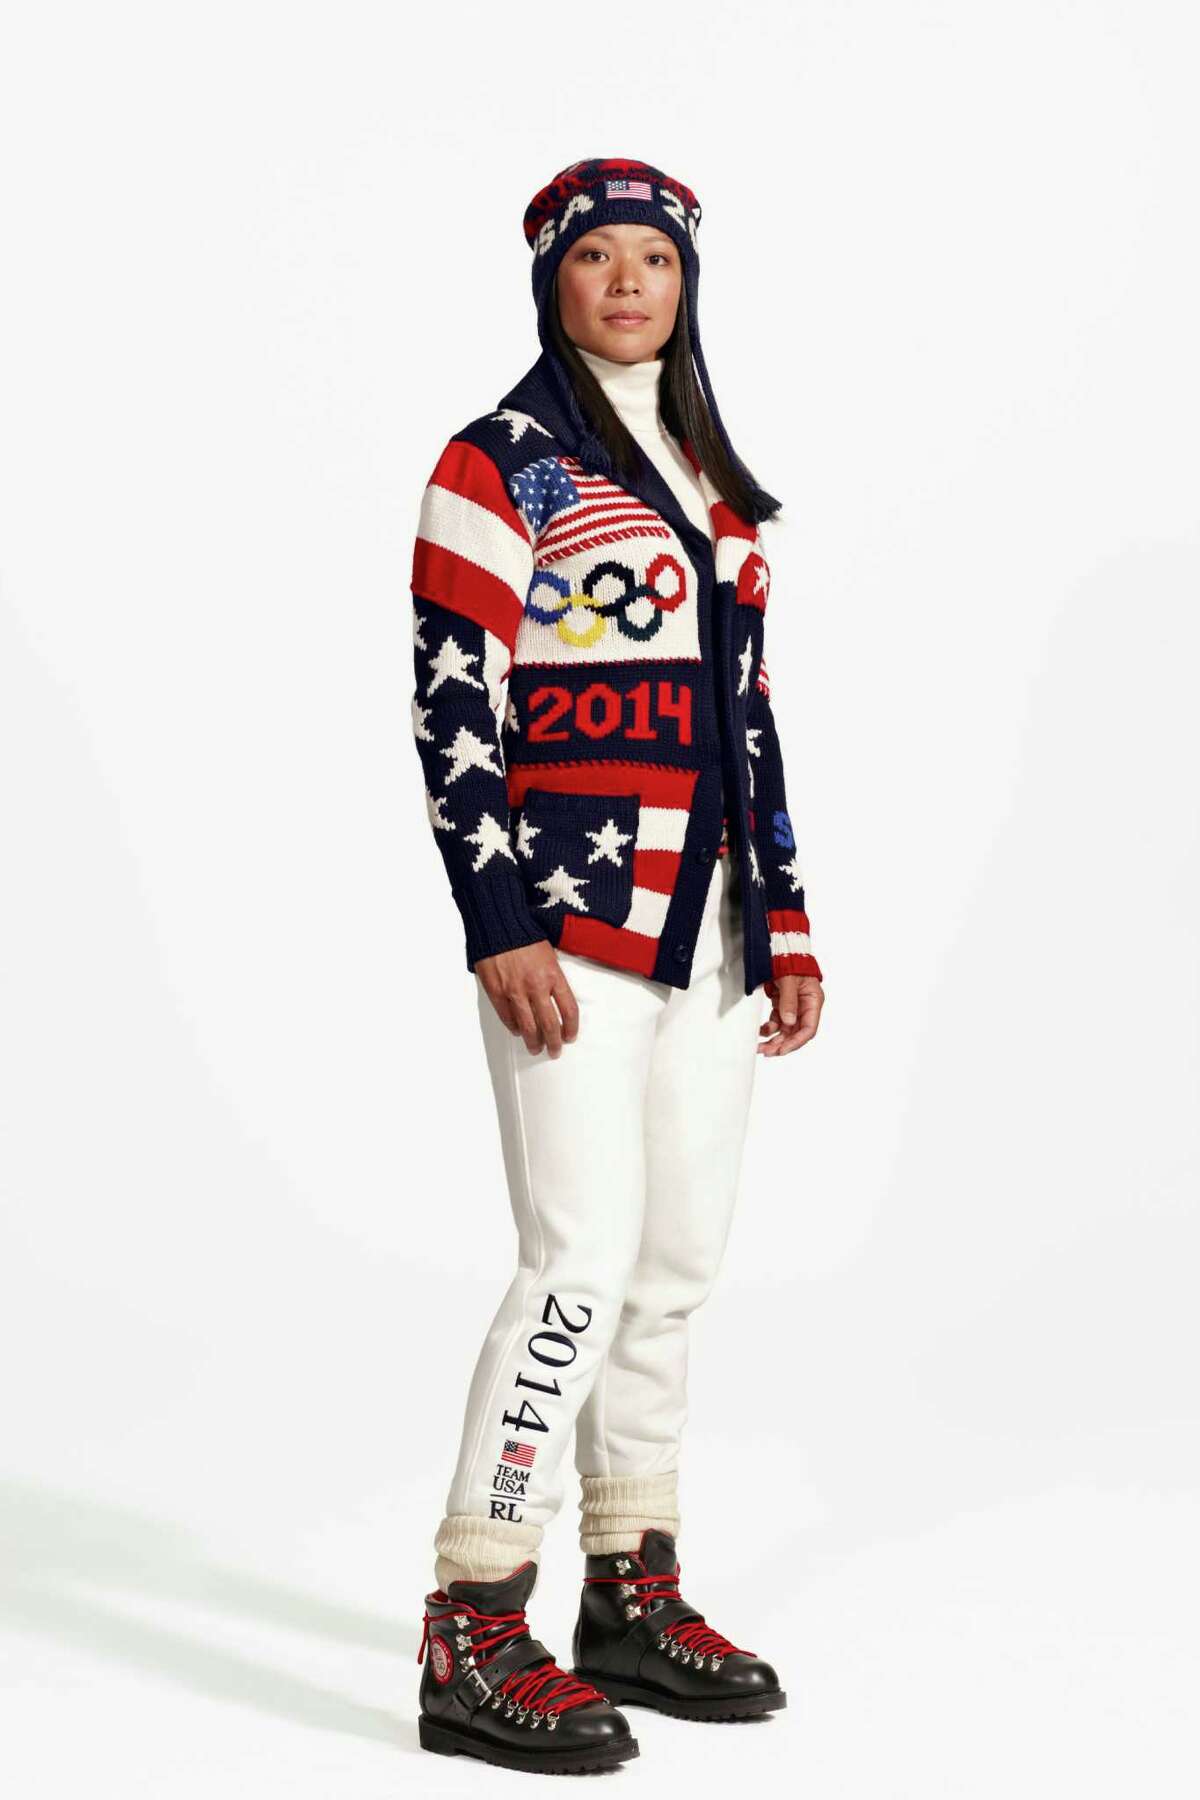 This product image released by Ralph Lauren shows American Olympic ice hockey player Julie Chu wearing the official uniform for Team USA to be worn at the opening ceremony for the 2014 Winter Olympic games in Sochi, Russia. Every article of clothing made by Ralph Lauren for the U.S. Winter Olympic athletes in Sochi, including their opening and closing ceremony uniforms and their Olympic Village gear, has been made by domestic craftsman and manufacturers. (AP Photo/Ralph Lauren)